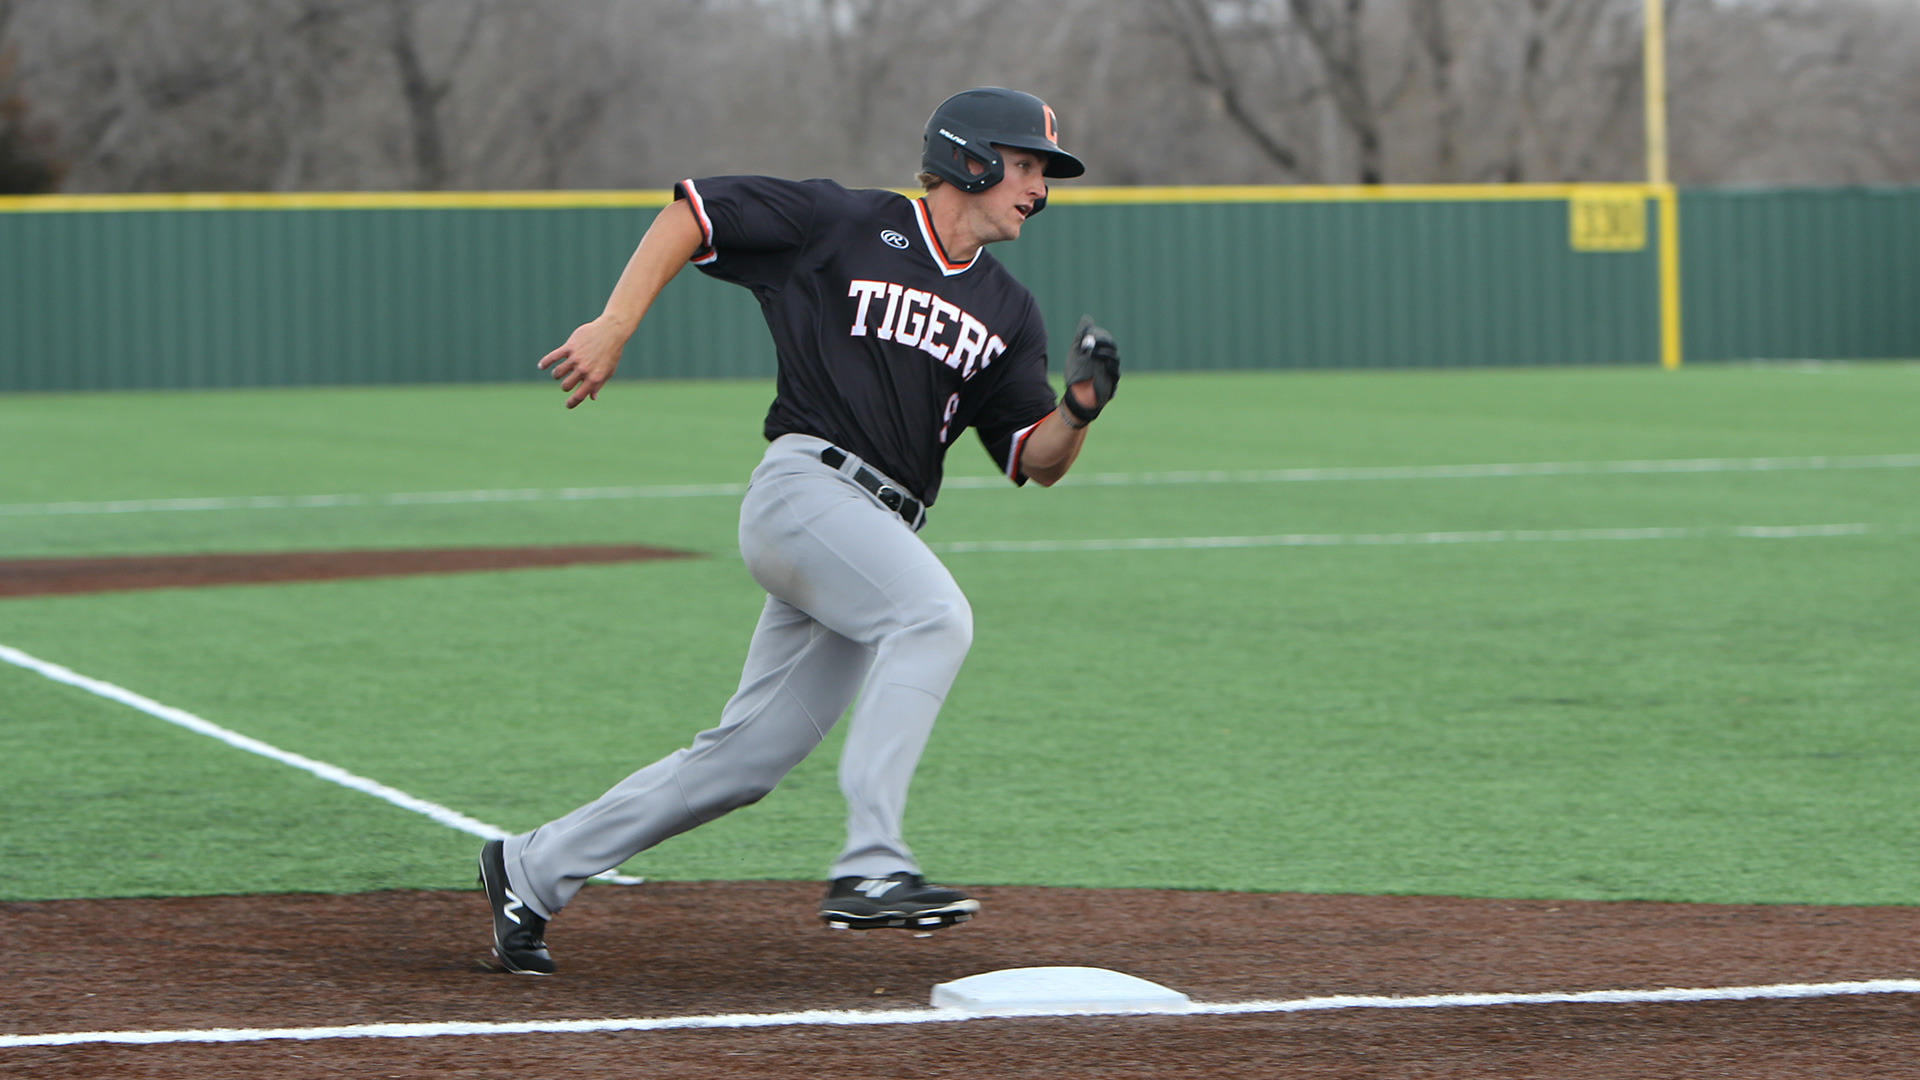 Tigers fall in extra innings, take three of four against Labette